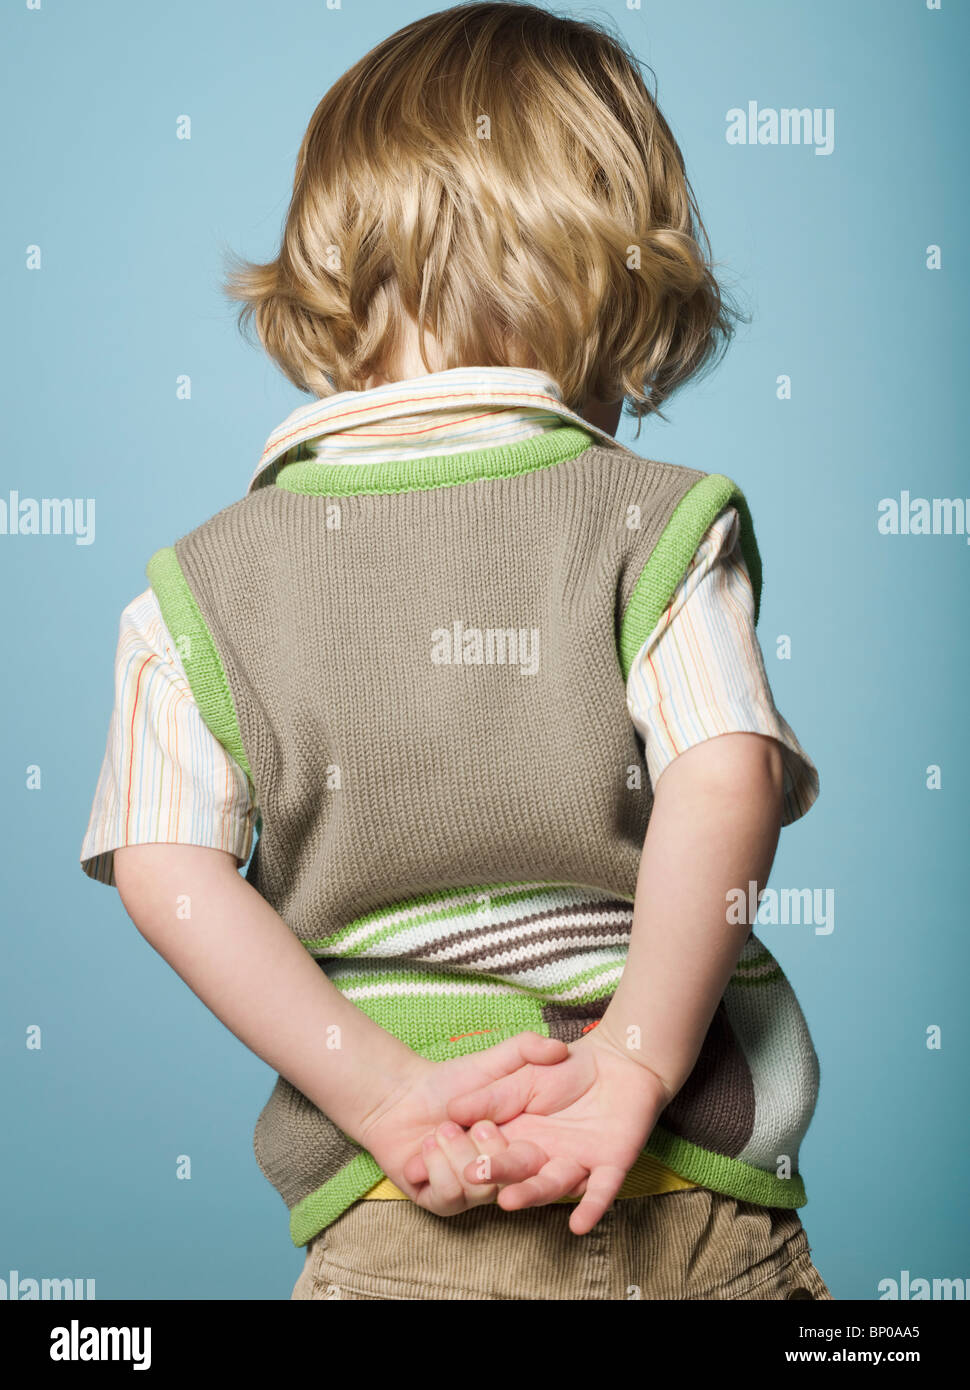 Little boy with hands behind back, rear view Stock Photo